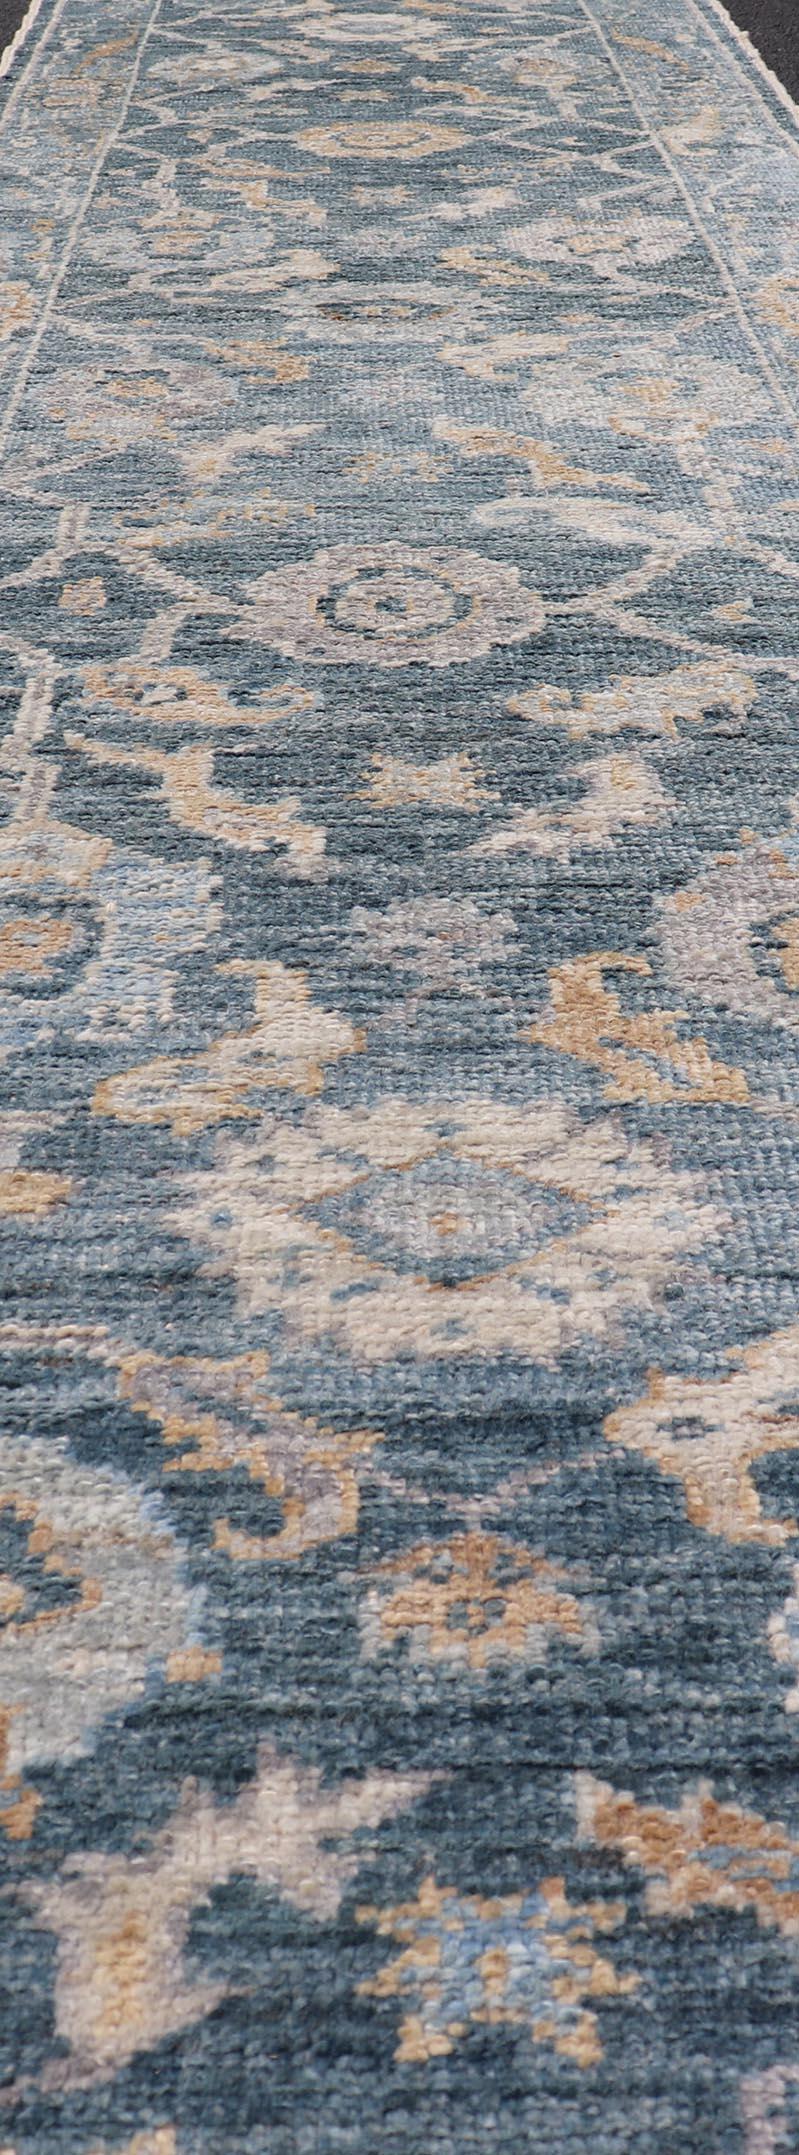 The field portrays a Oushak floral design in cream, light blue, cream and tan. The background is rendered in a rich dark blue .The border design in this piece is a leaflet-motif design in same colors. 

Measures; 2'7 x 13'3 

Keivan Woven Arts